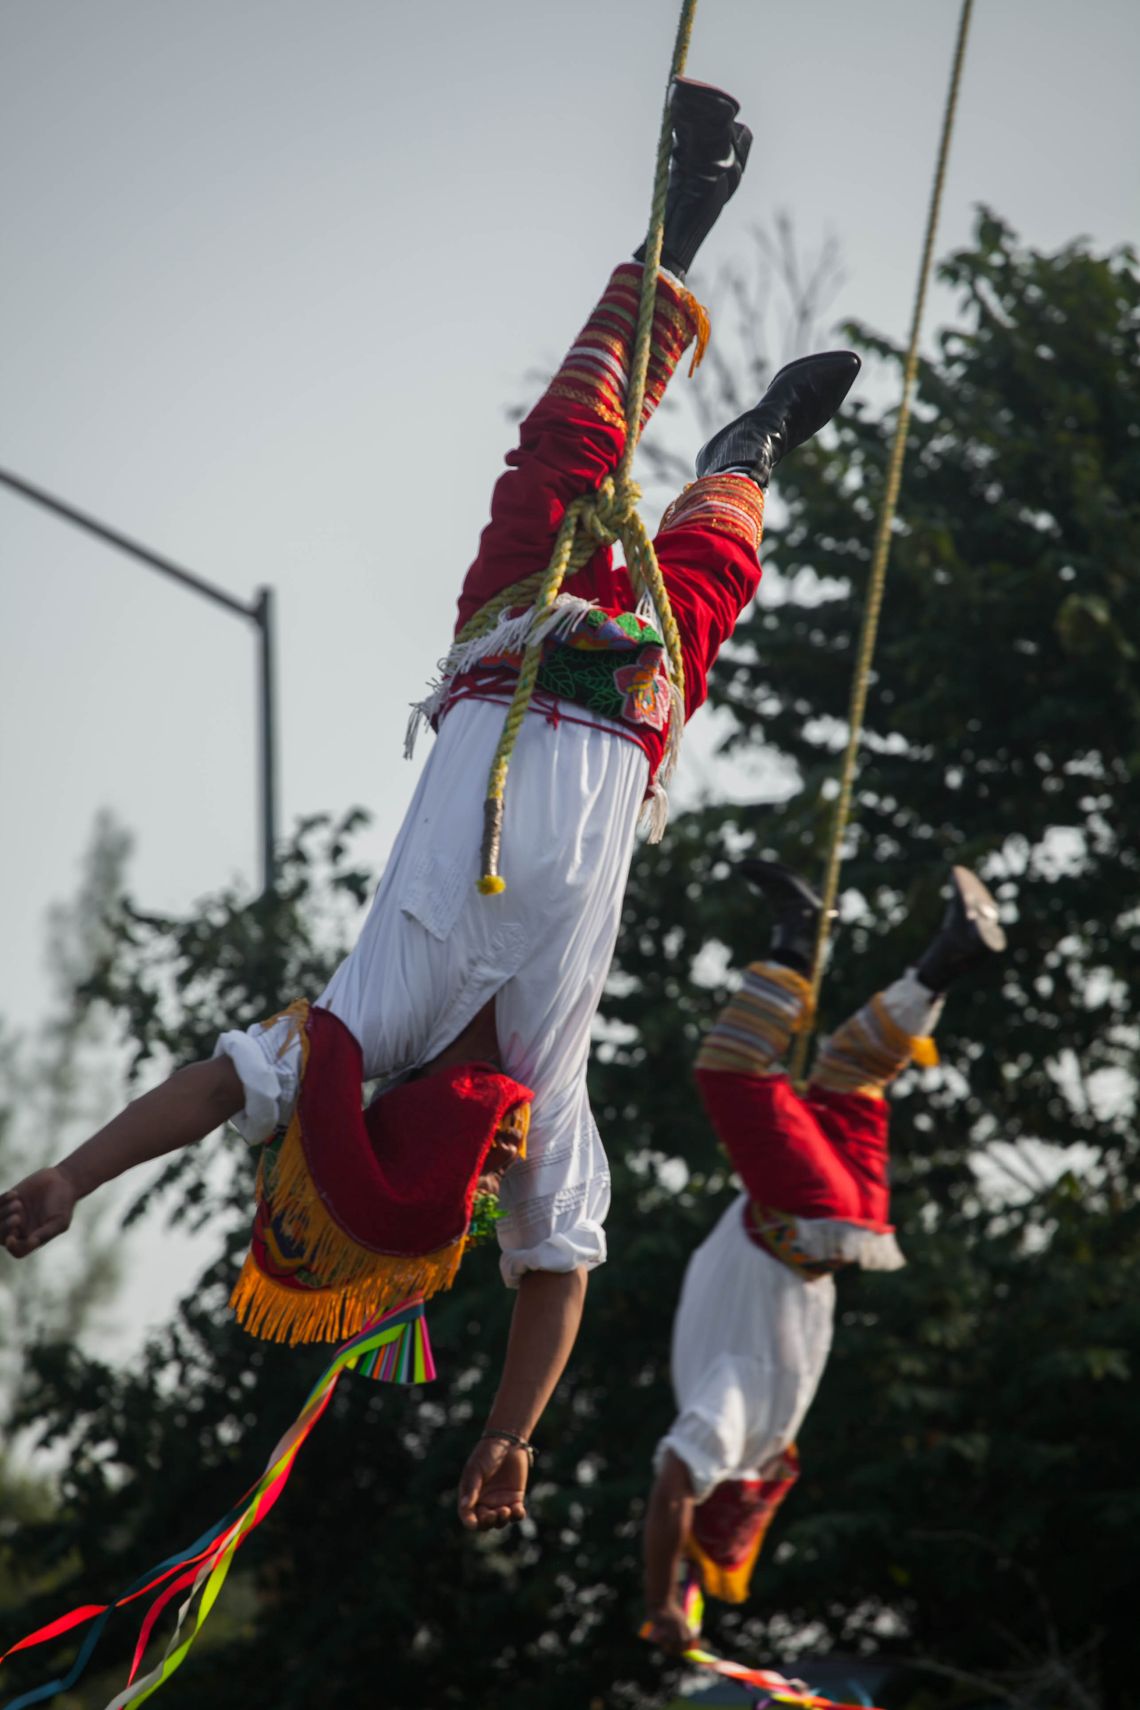 A man and a child descend to the ground attached to a rope as part of a ritual.